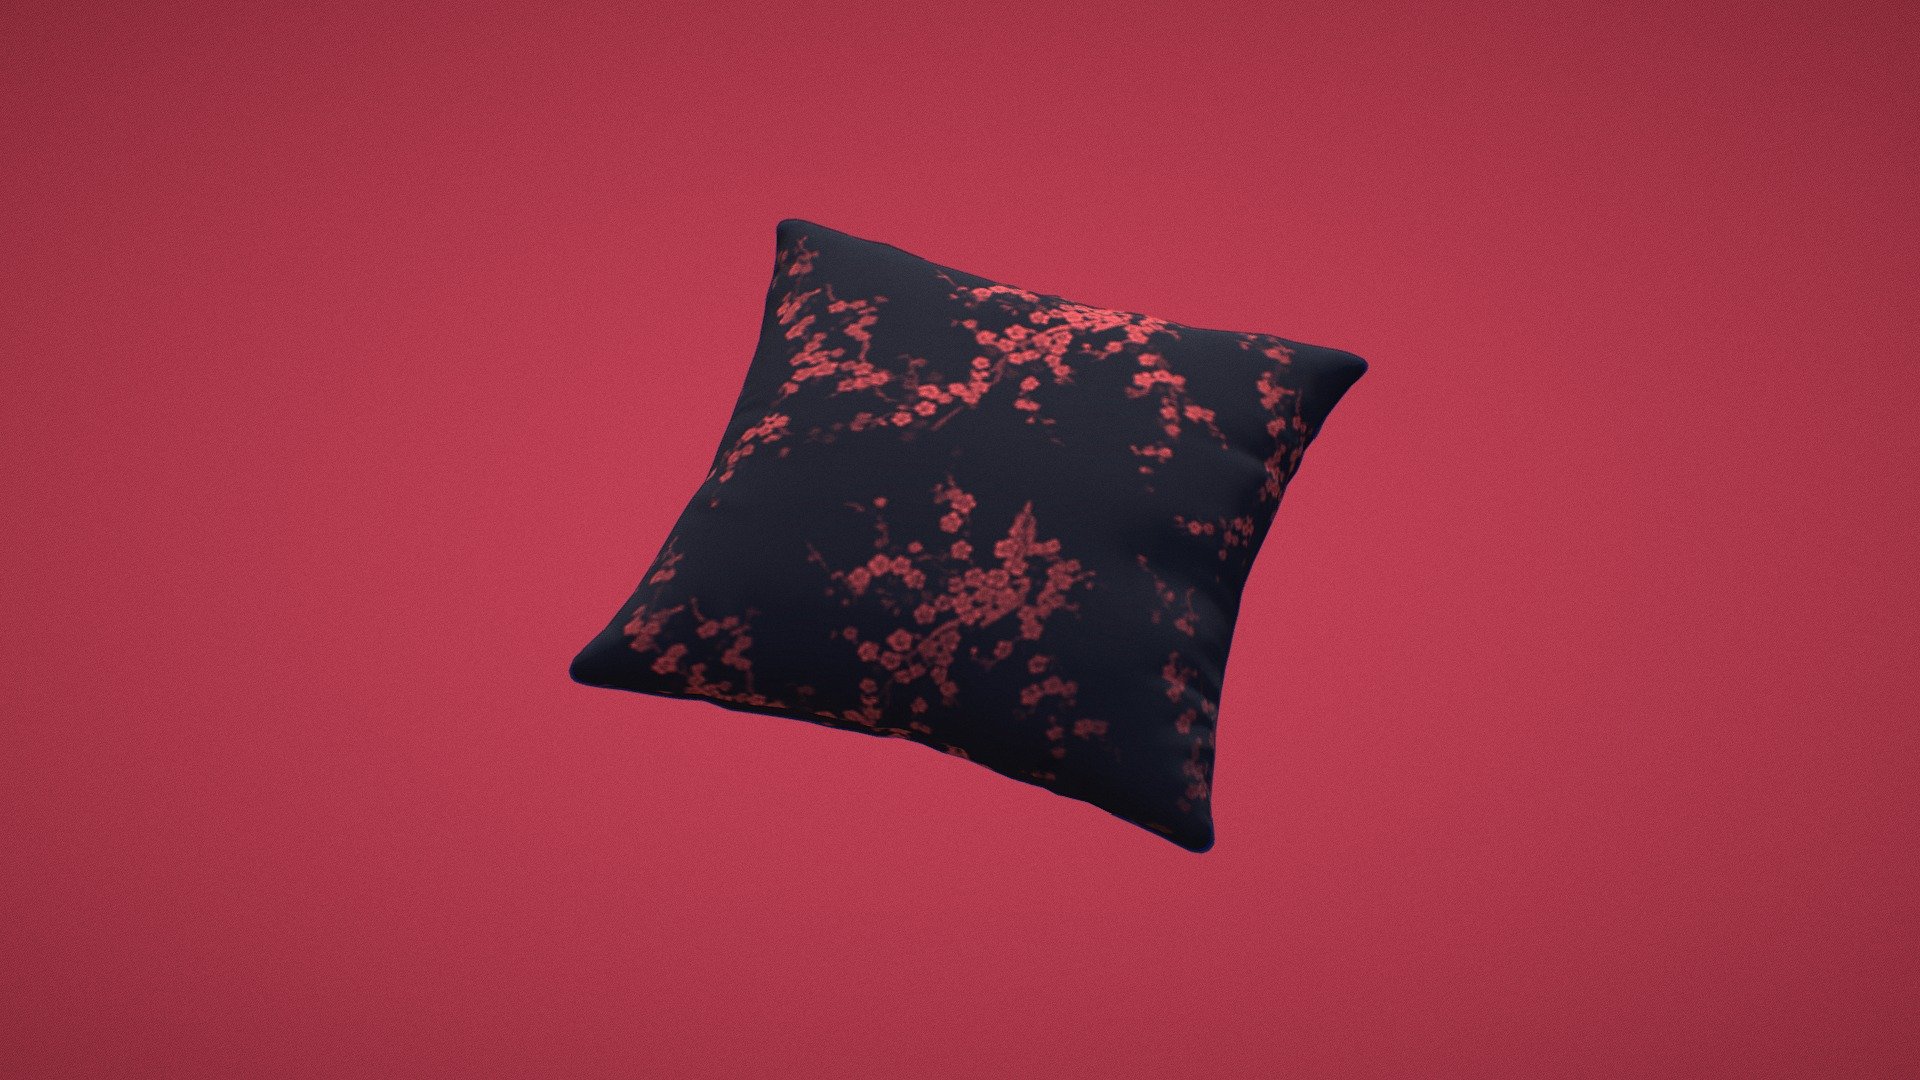 Simple modern pillow.  Perfect for your very own couch - super easy to customise its design. Just put whatever picture/colour you'd like as a texture.
Optimised for video games, complete with a normal map. Textured in a way that it's easy to put on your own design or colour on the pillow 3d model